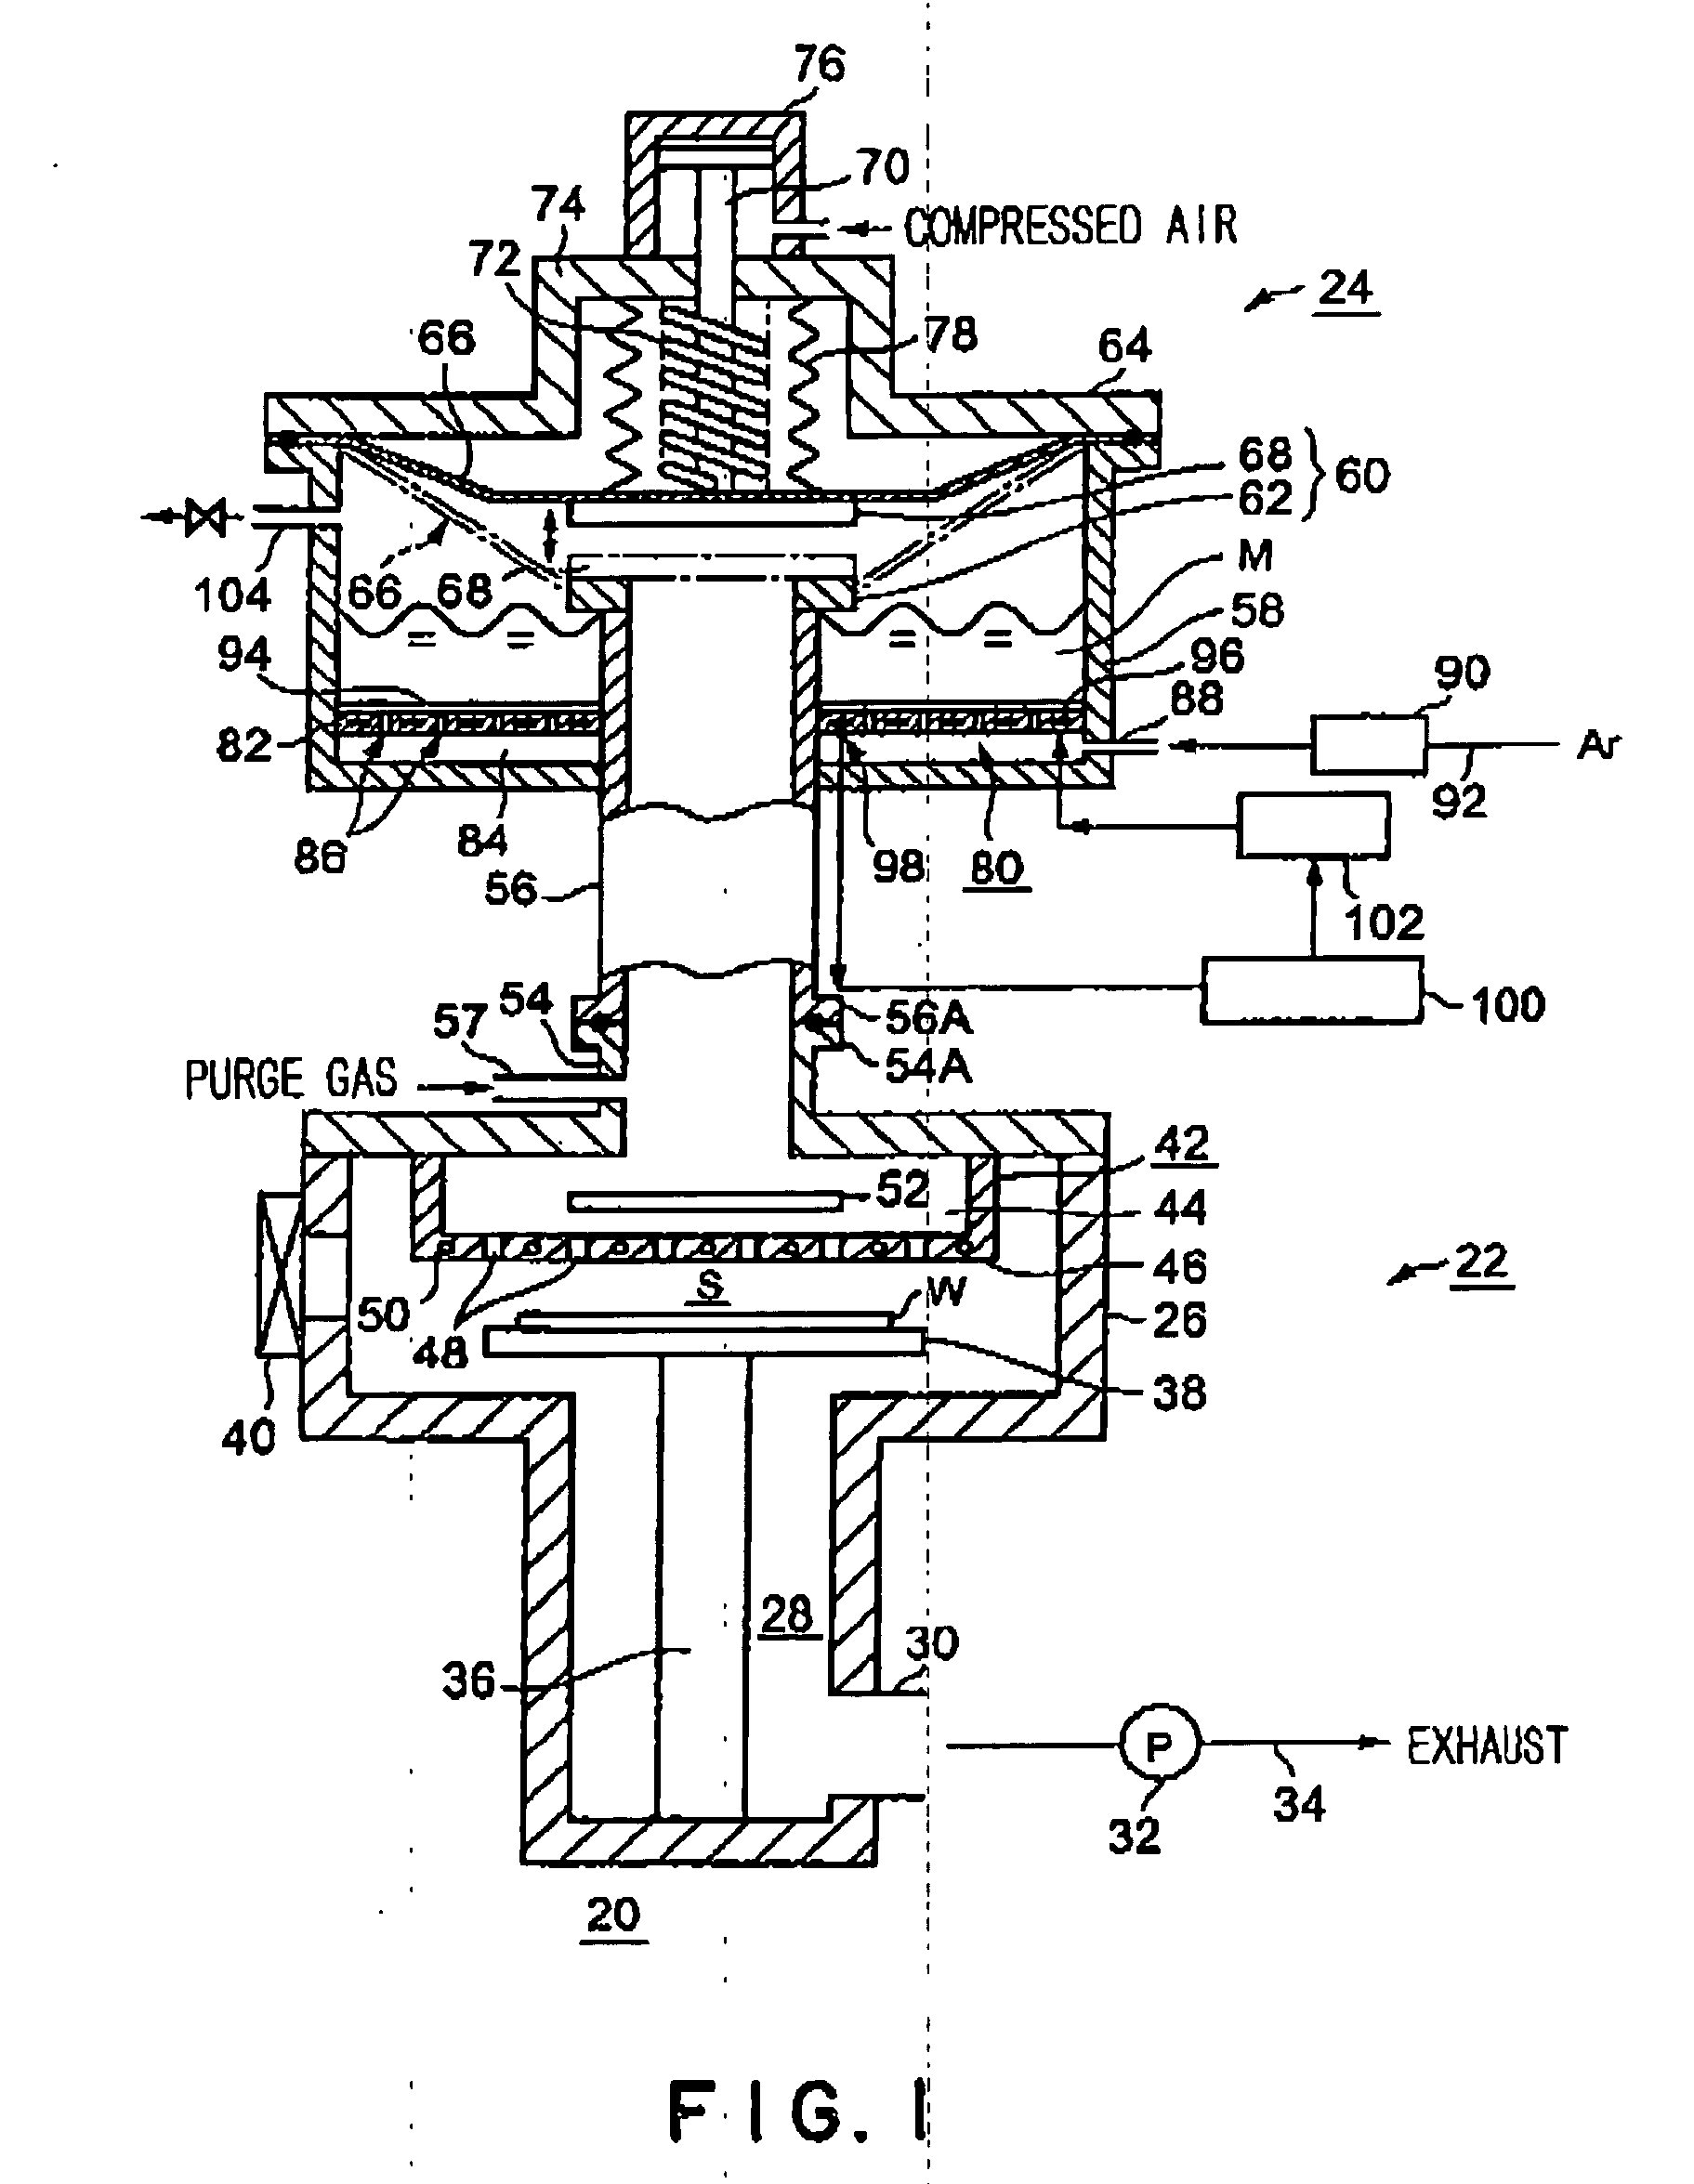 Gas supply system and processing system